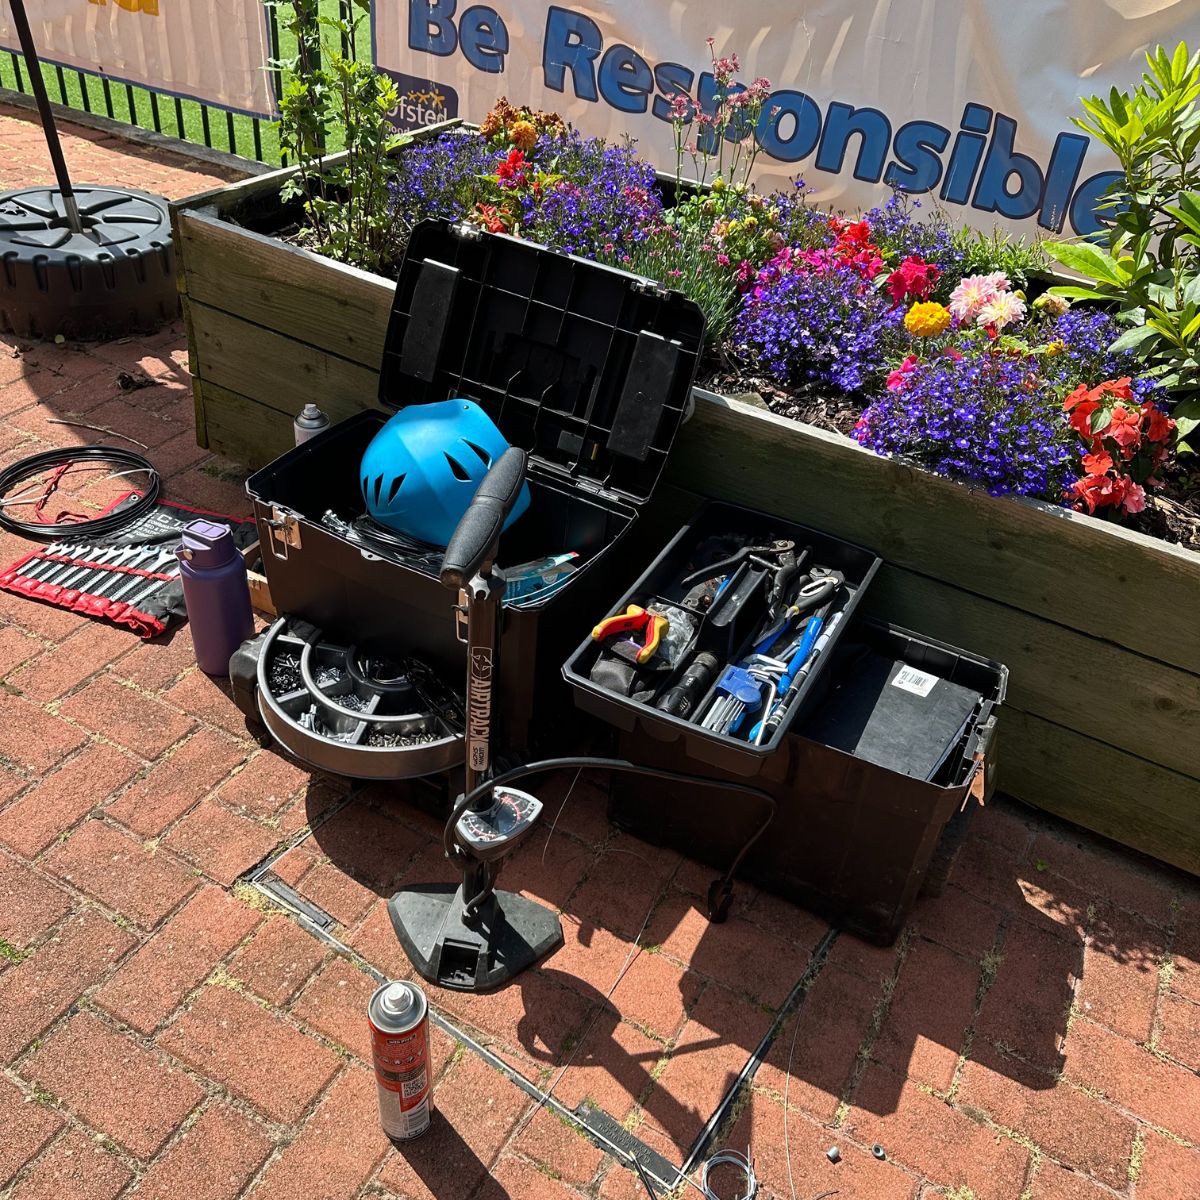 Cycle tools by a planter